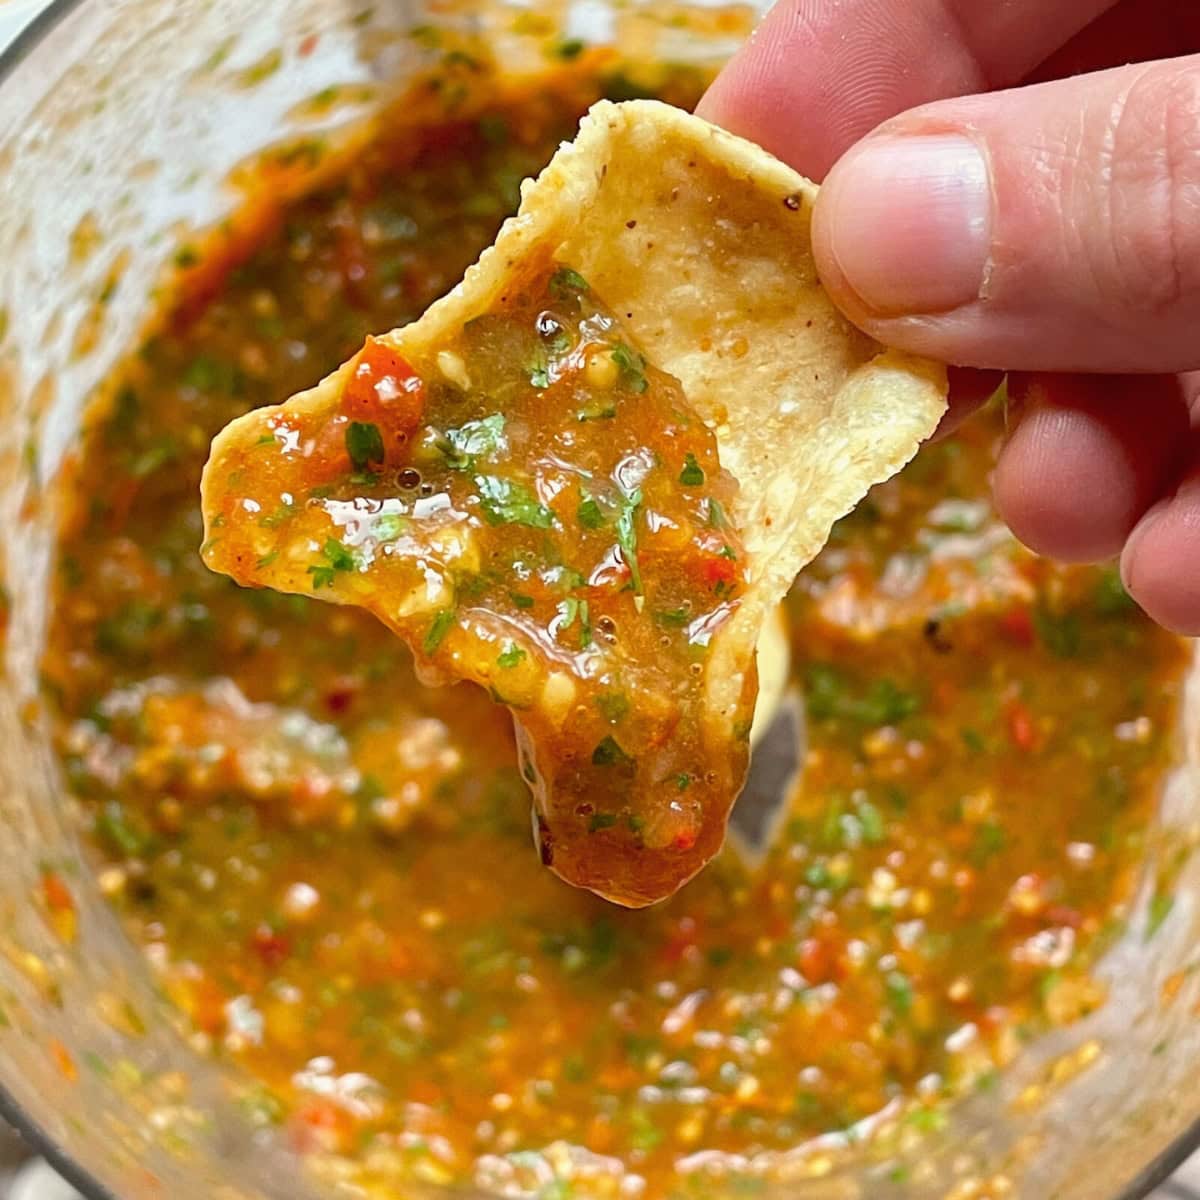 A hand scooping some fire-roasted cherry tomato salsa up with a chip.